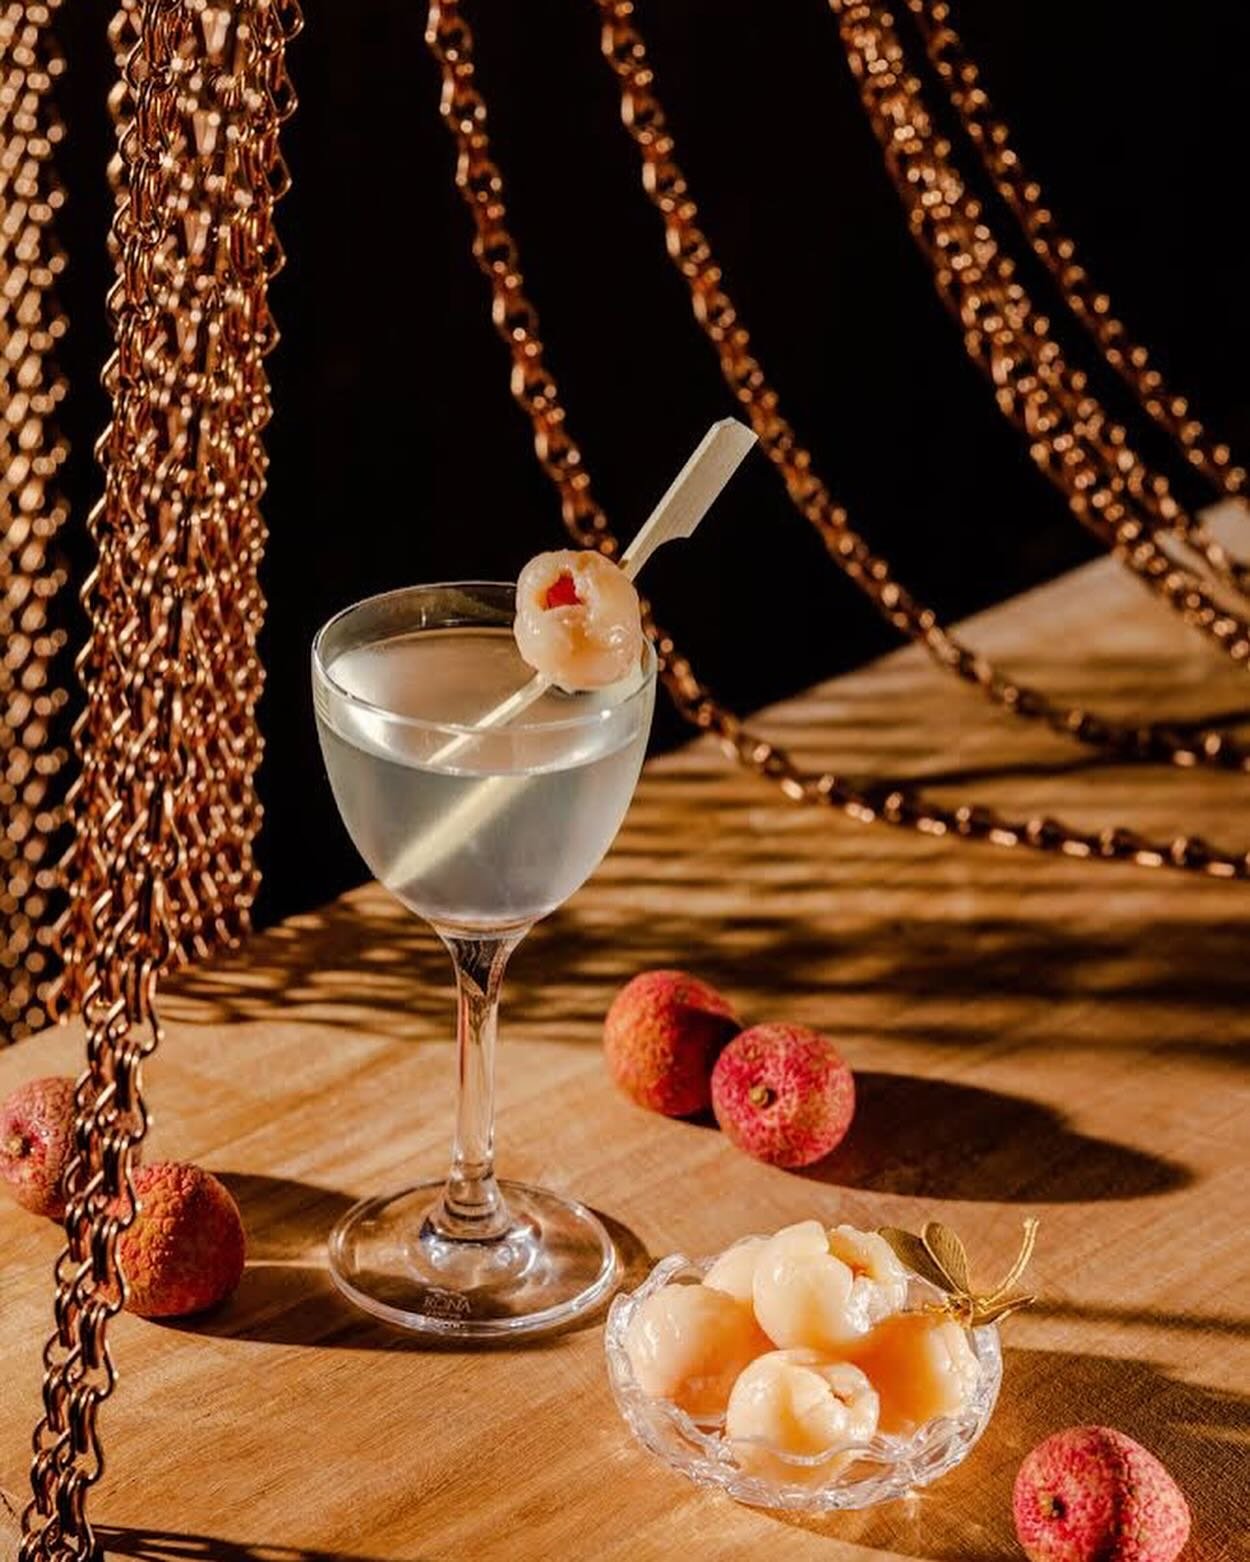 Lychee Love is a sweet and silky mix of Australian Baijiu, dry vermouth and lychee syrup made by our Chief Mixologist, Joe Sinagra. It is the perfect guilty pleasure drink for those with a tropical sweet tooth. Scroll for recipe. Shop in bio. @austra